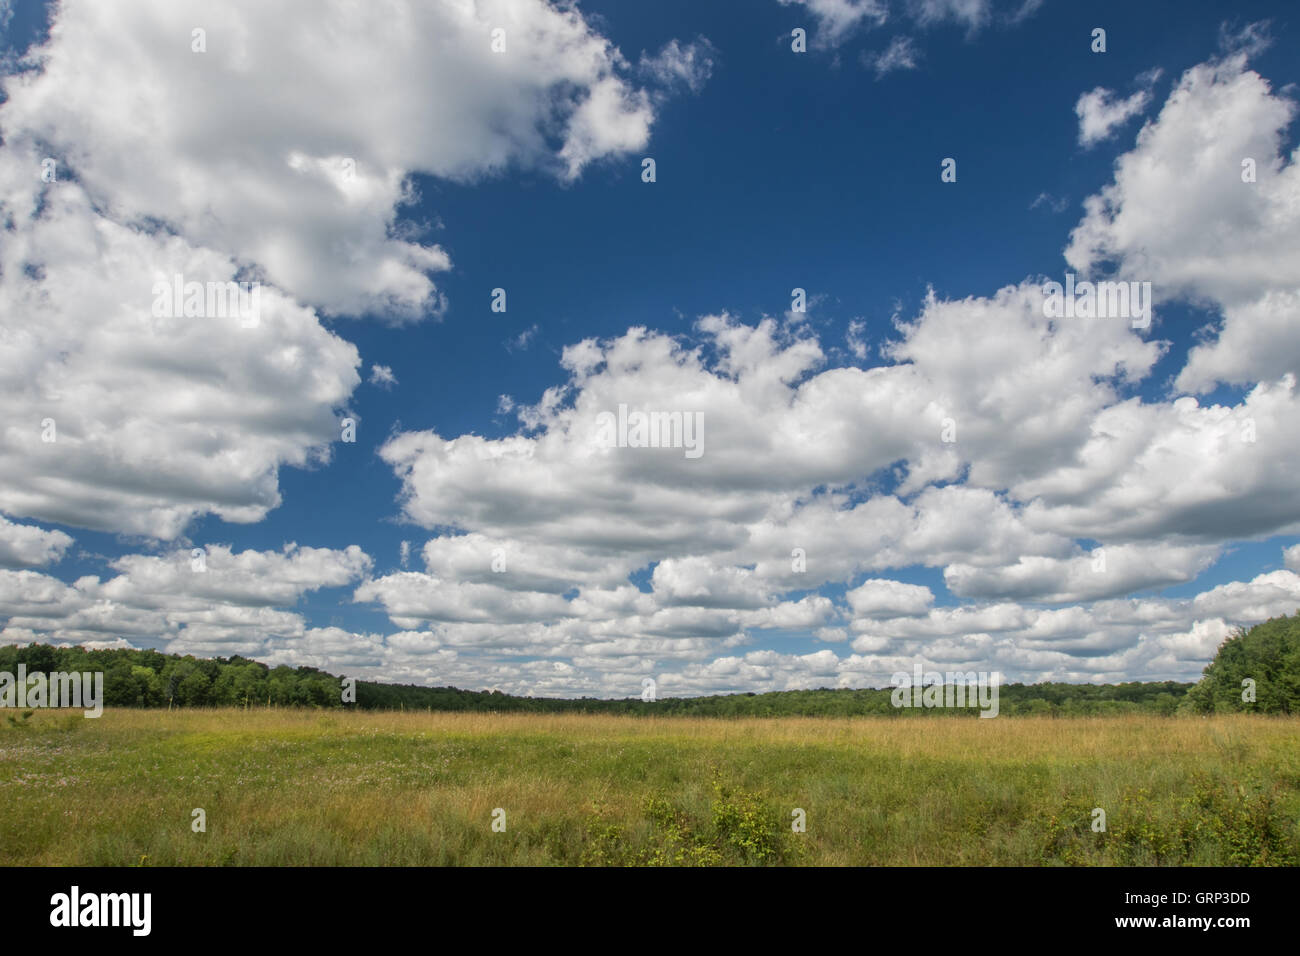 A bright sky with clouds over a summer grassy field. Stock Photo